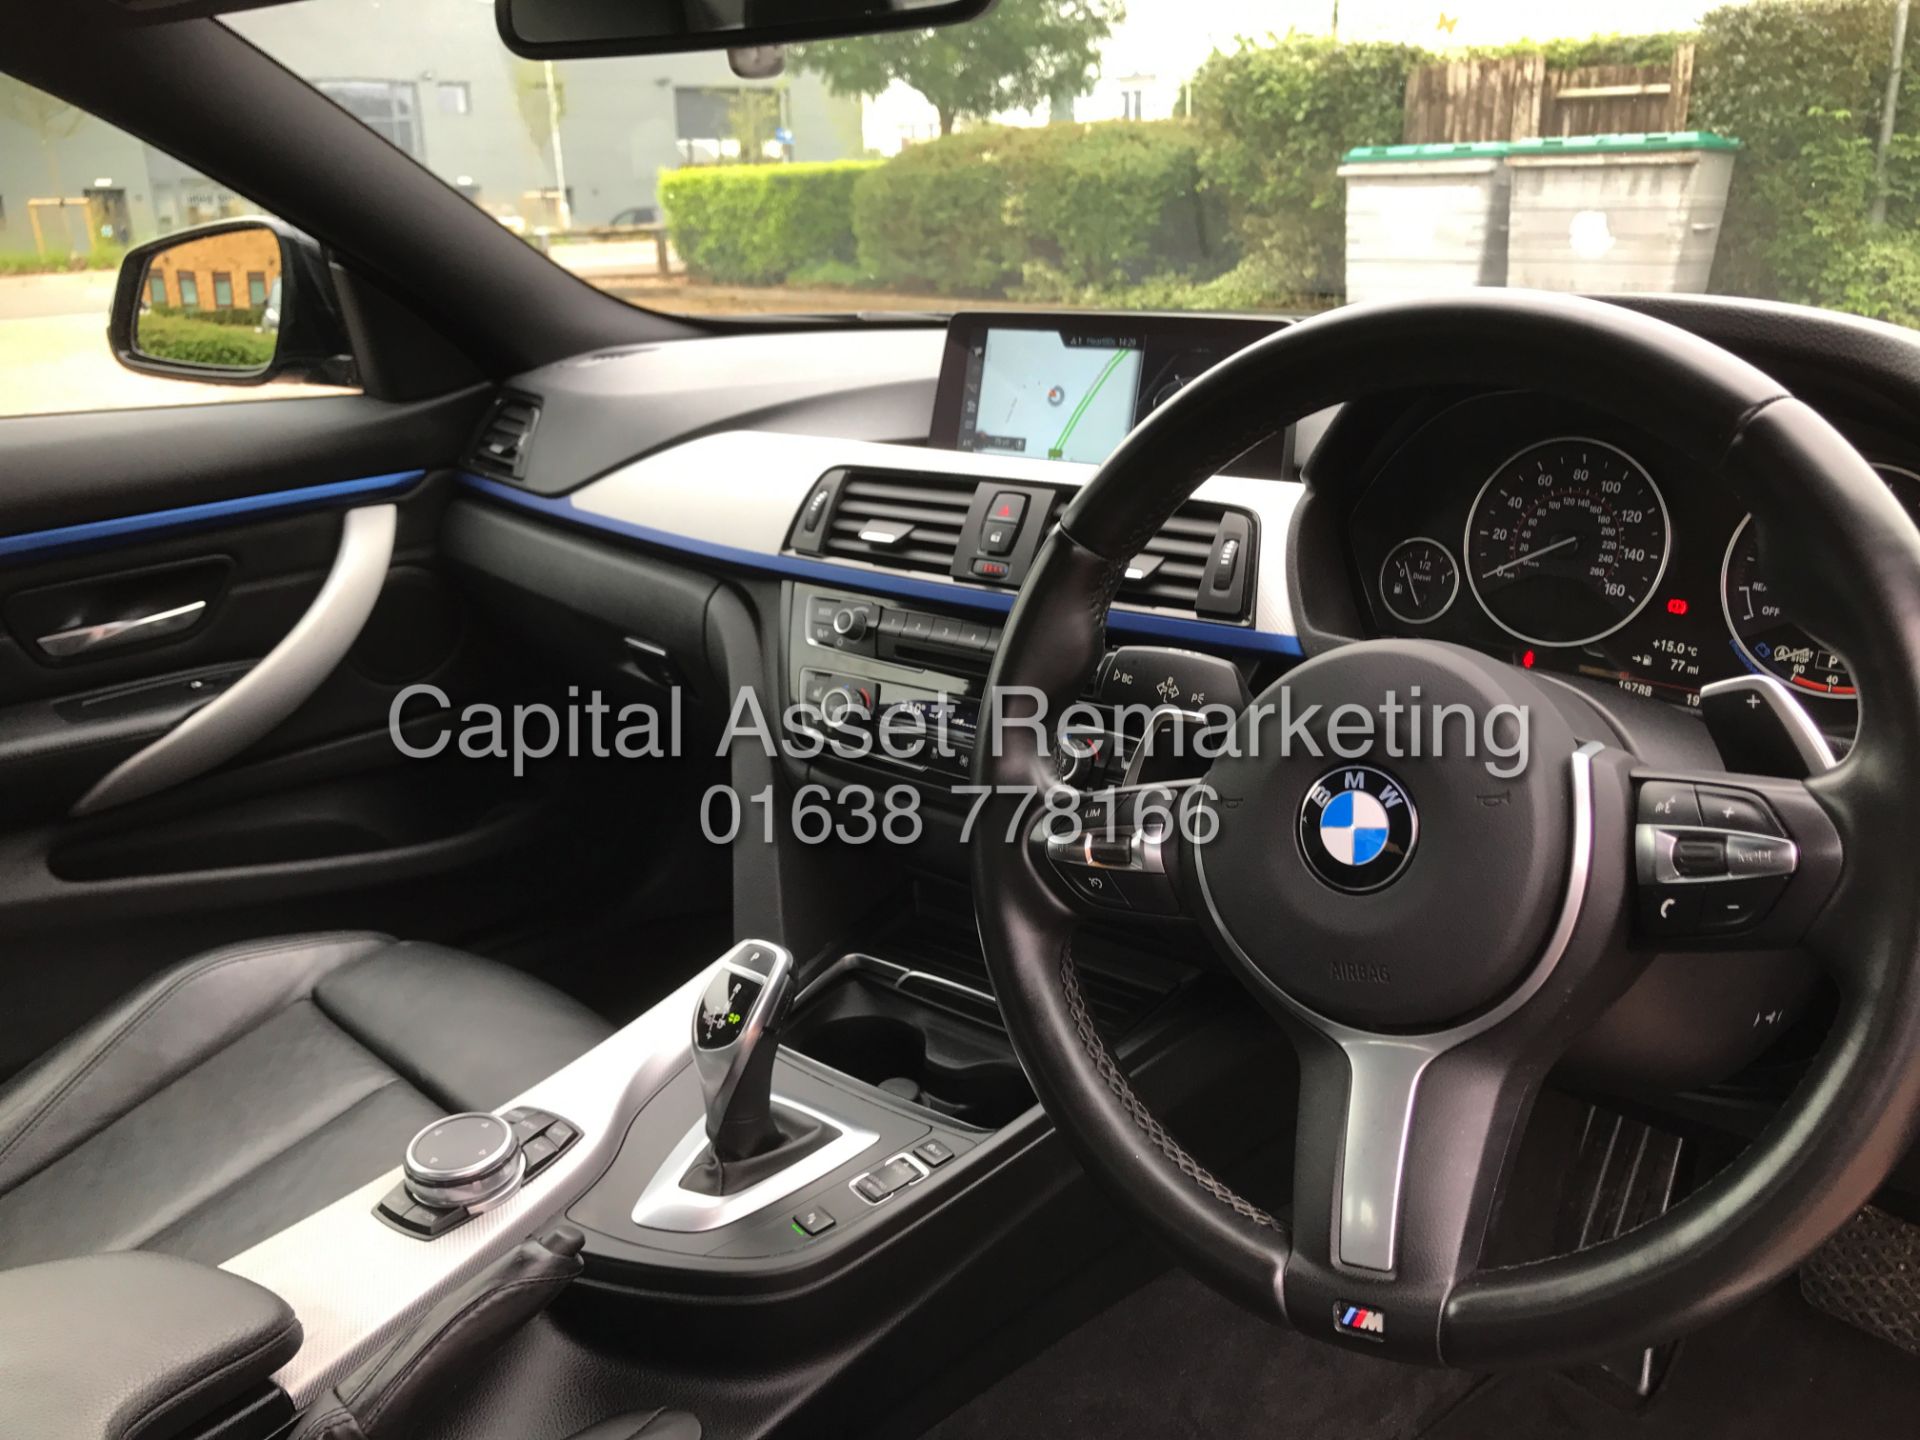 BMW 420D AUTO 8 SPEED "M-SPORT" COUPE (2017 MODEL) 1 OWNER WITH BMW HISTORY - SAT NAV - I DRIVE - Image 14 of 25